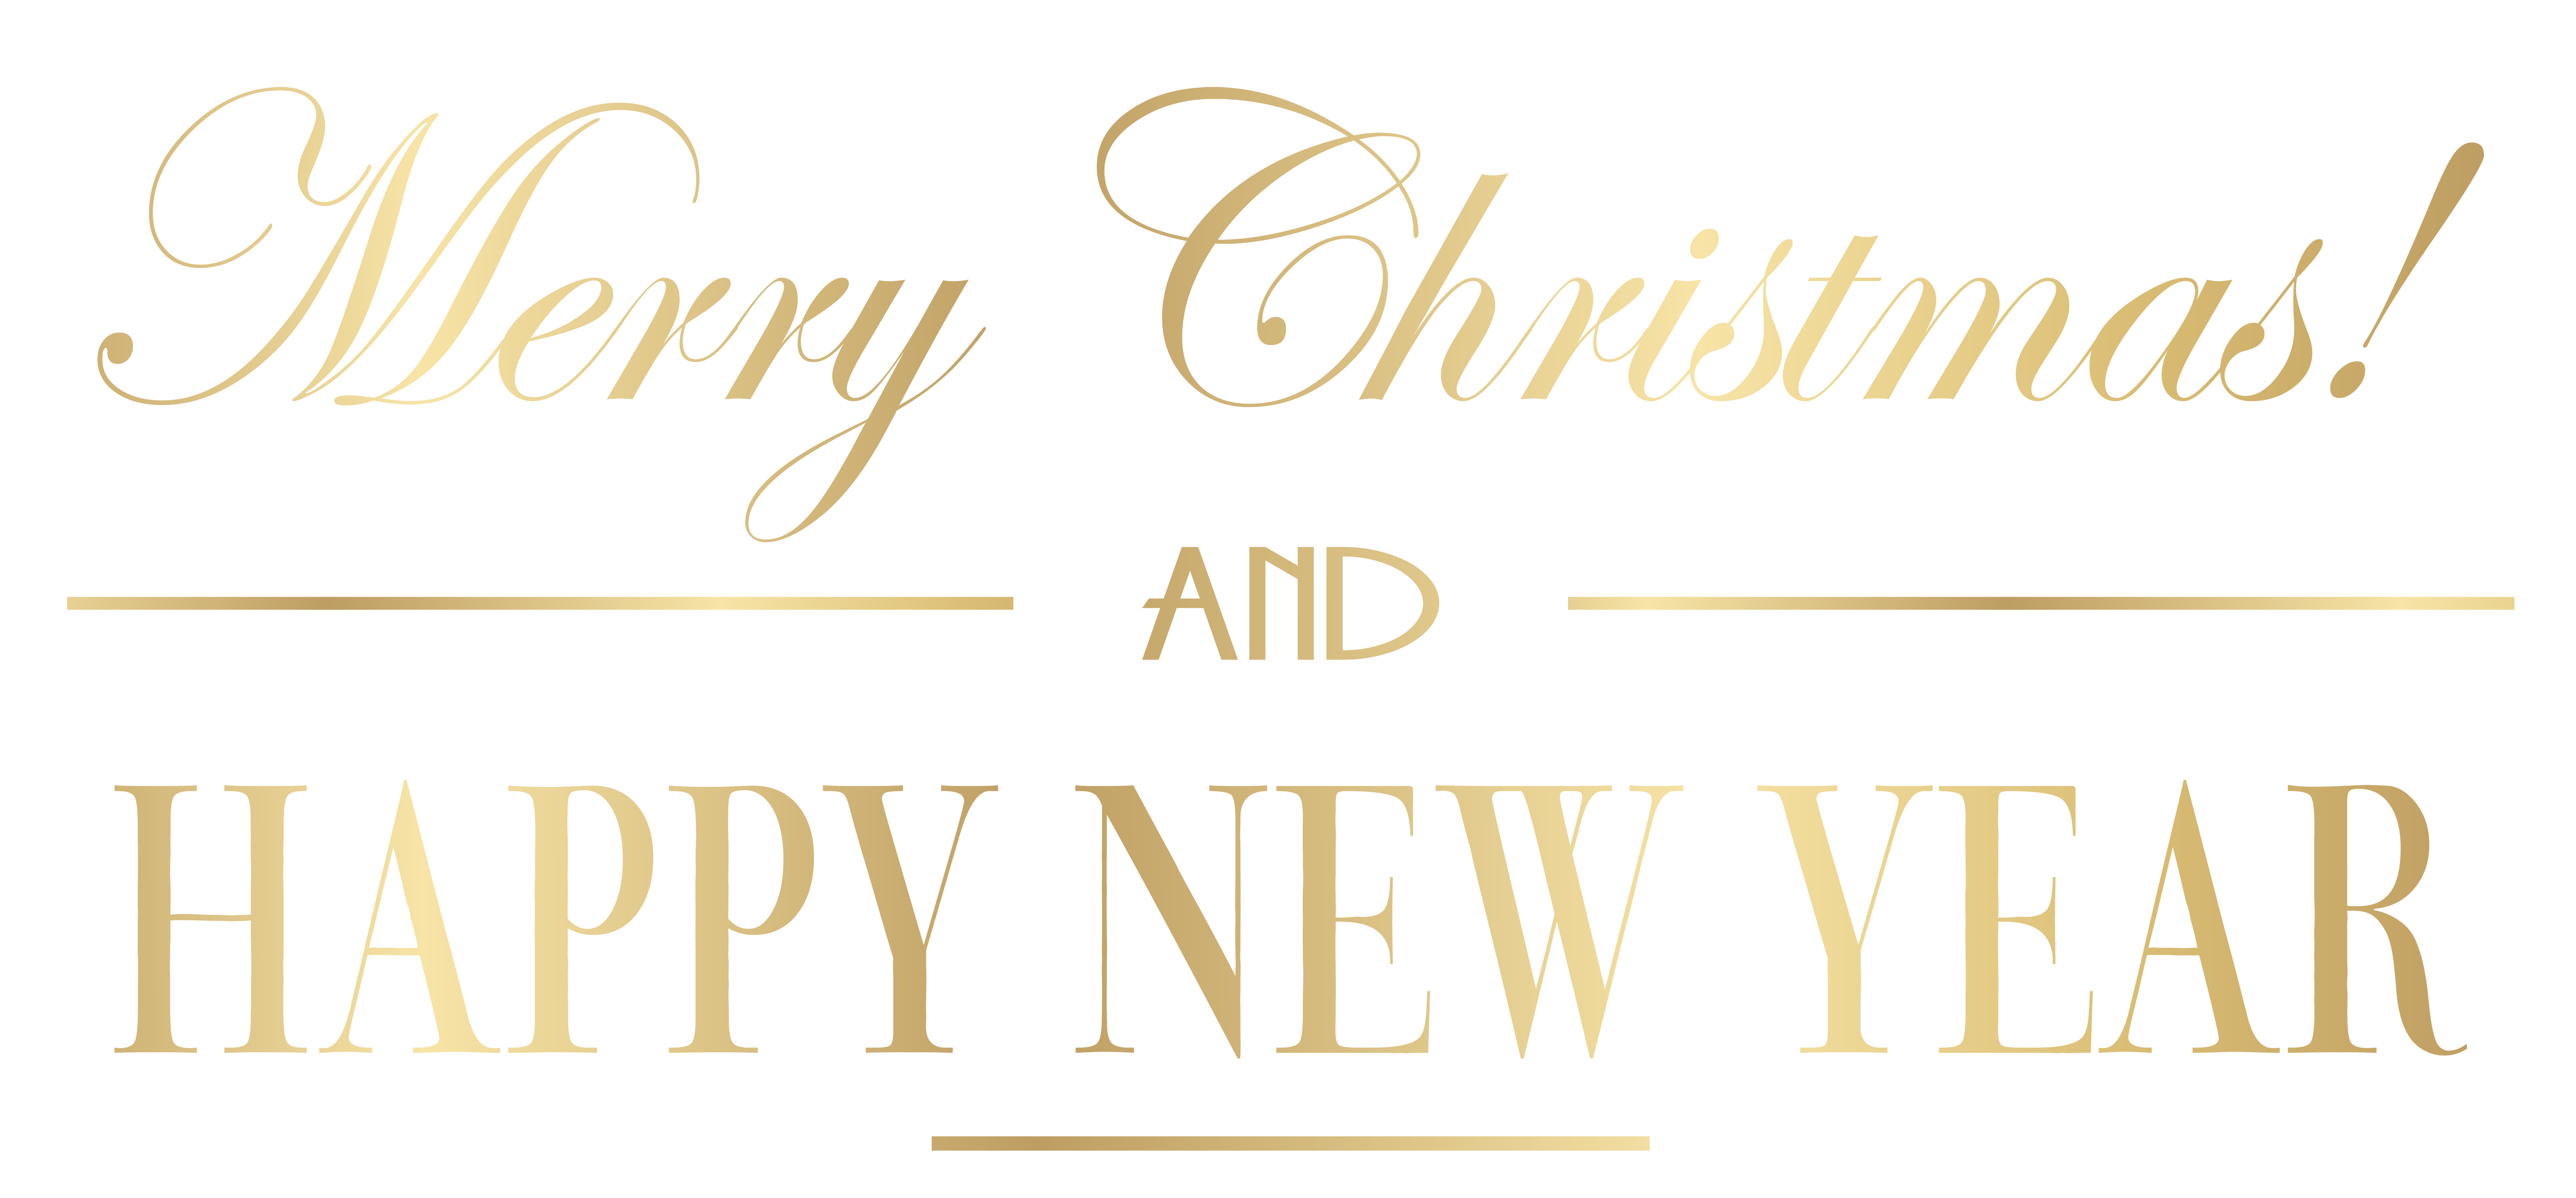 Merry Christmas and Happy New Year PNG Clip Art Image | Gallery Yopriceville - High-Quality ...